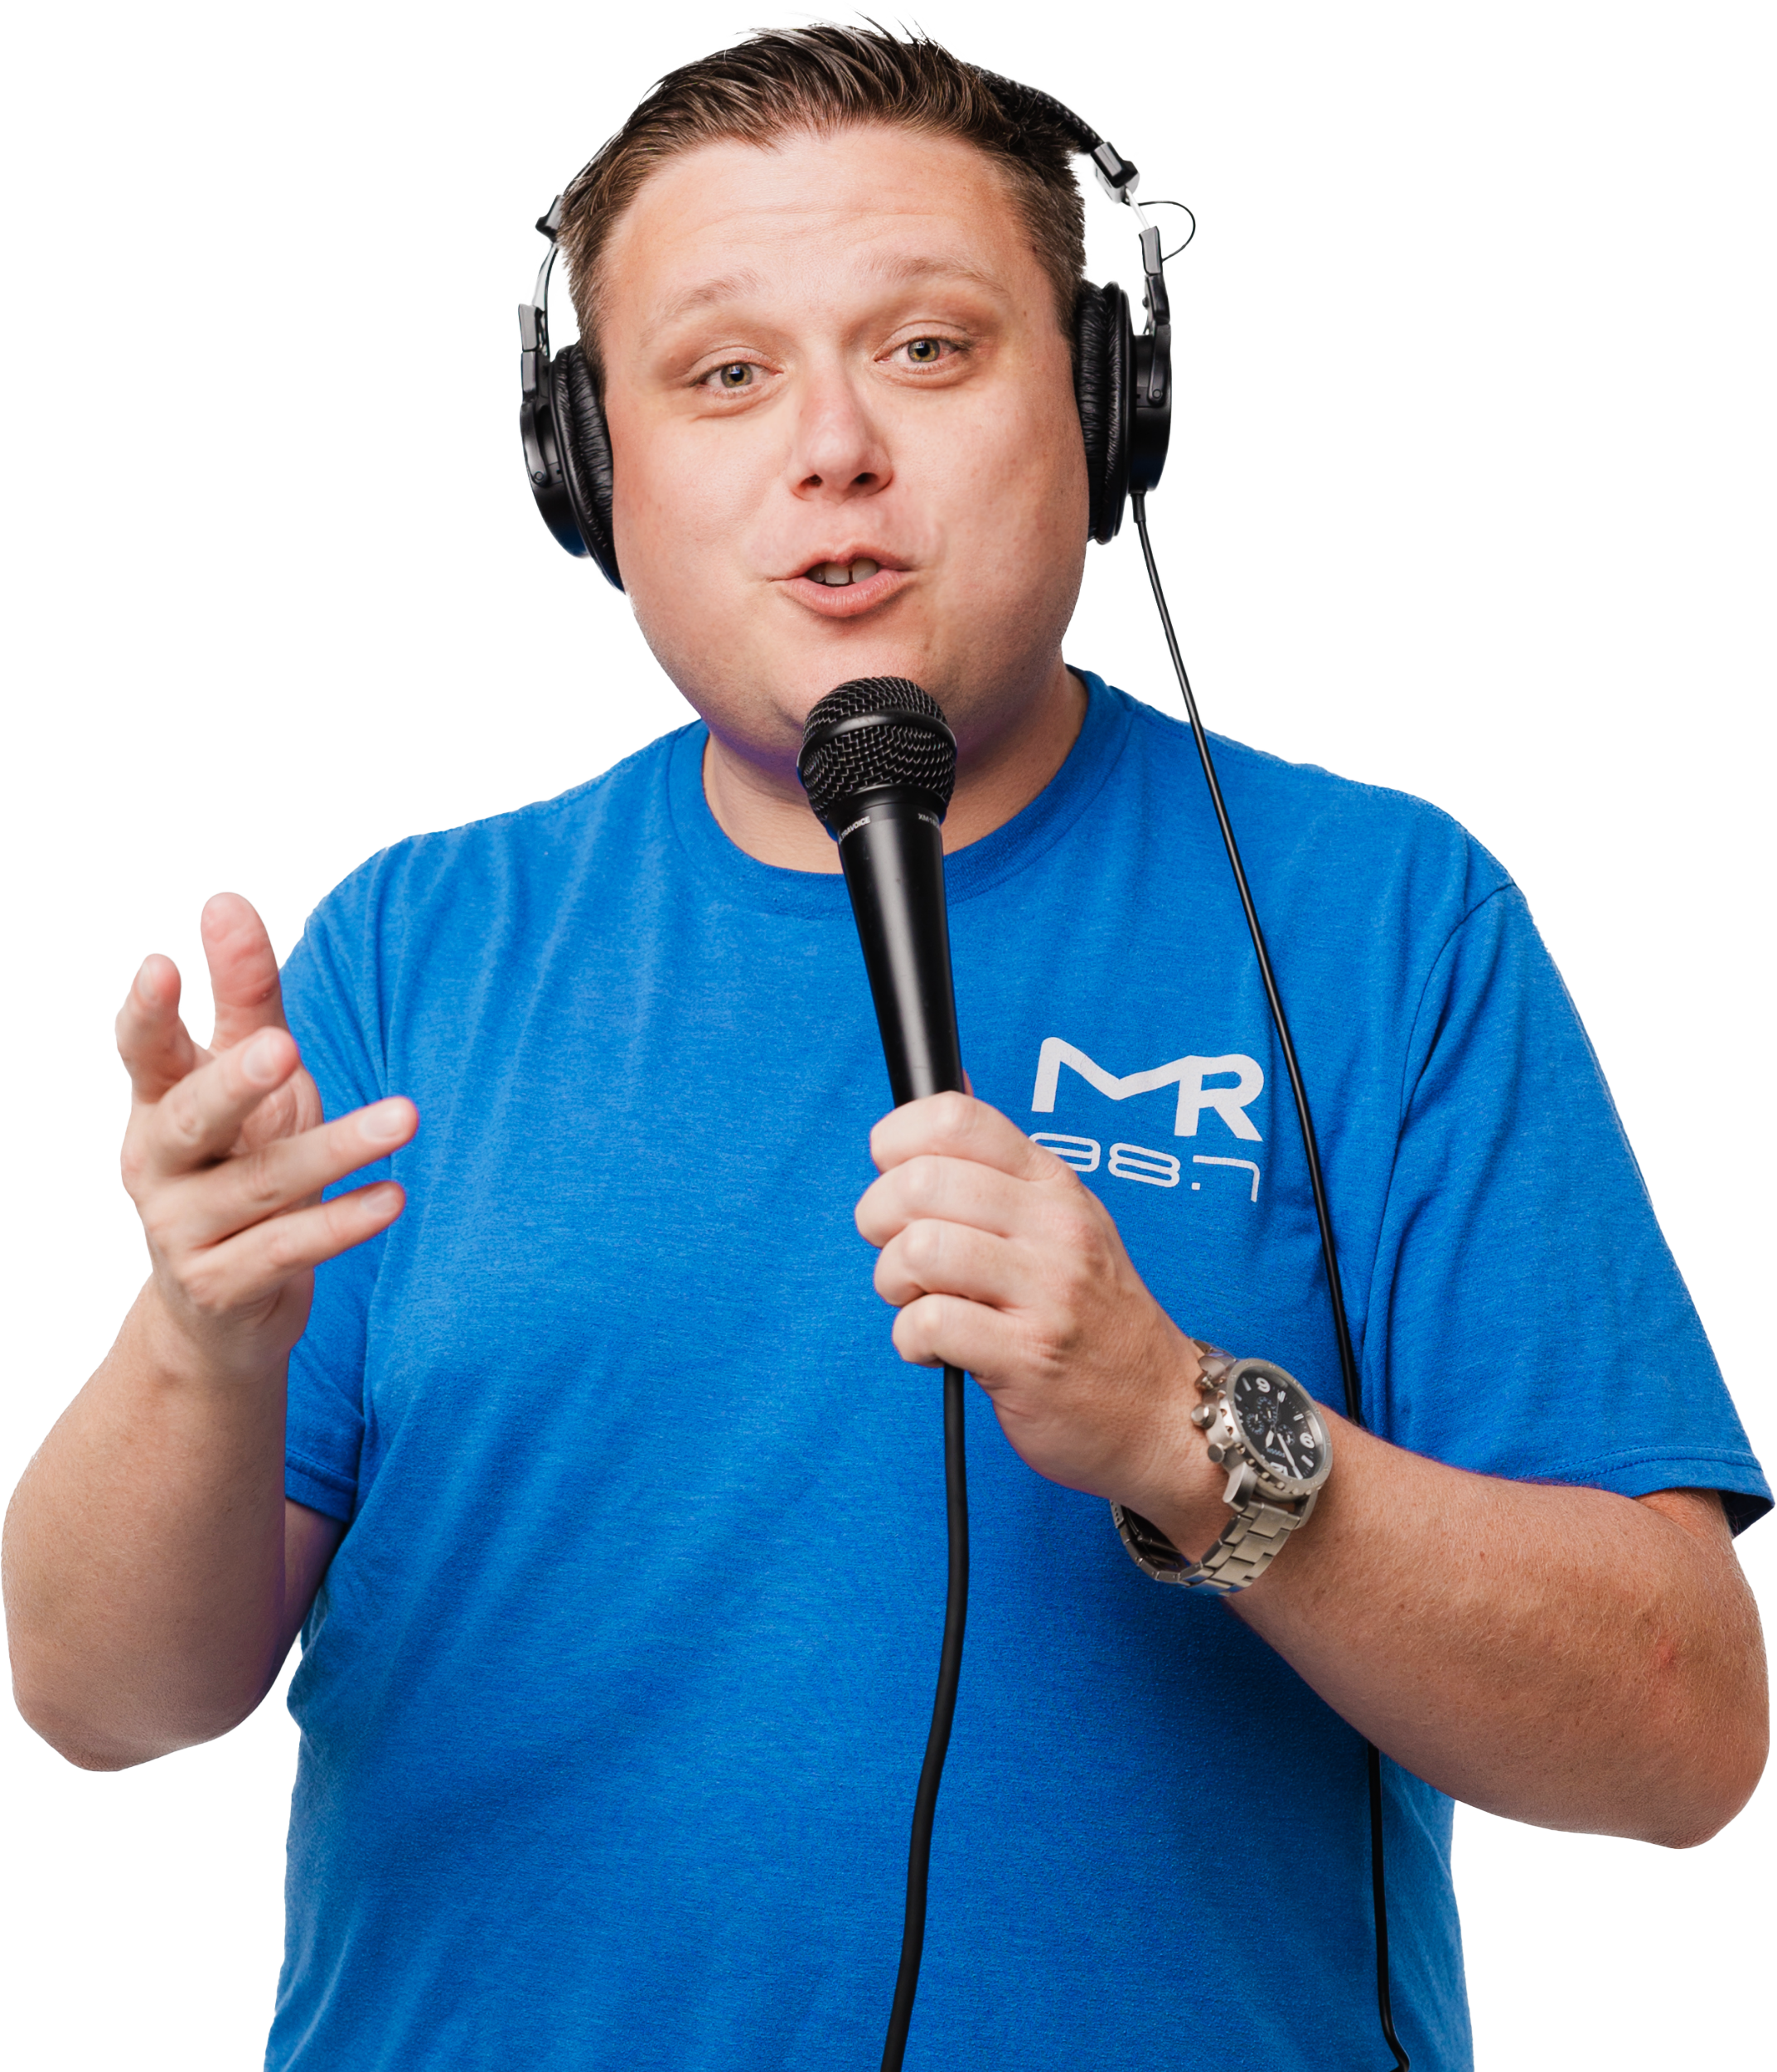 Randy Slack with studio monitors on holding a microphone in a royal blue shirt